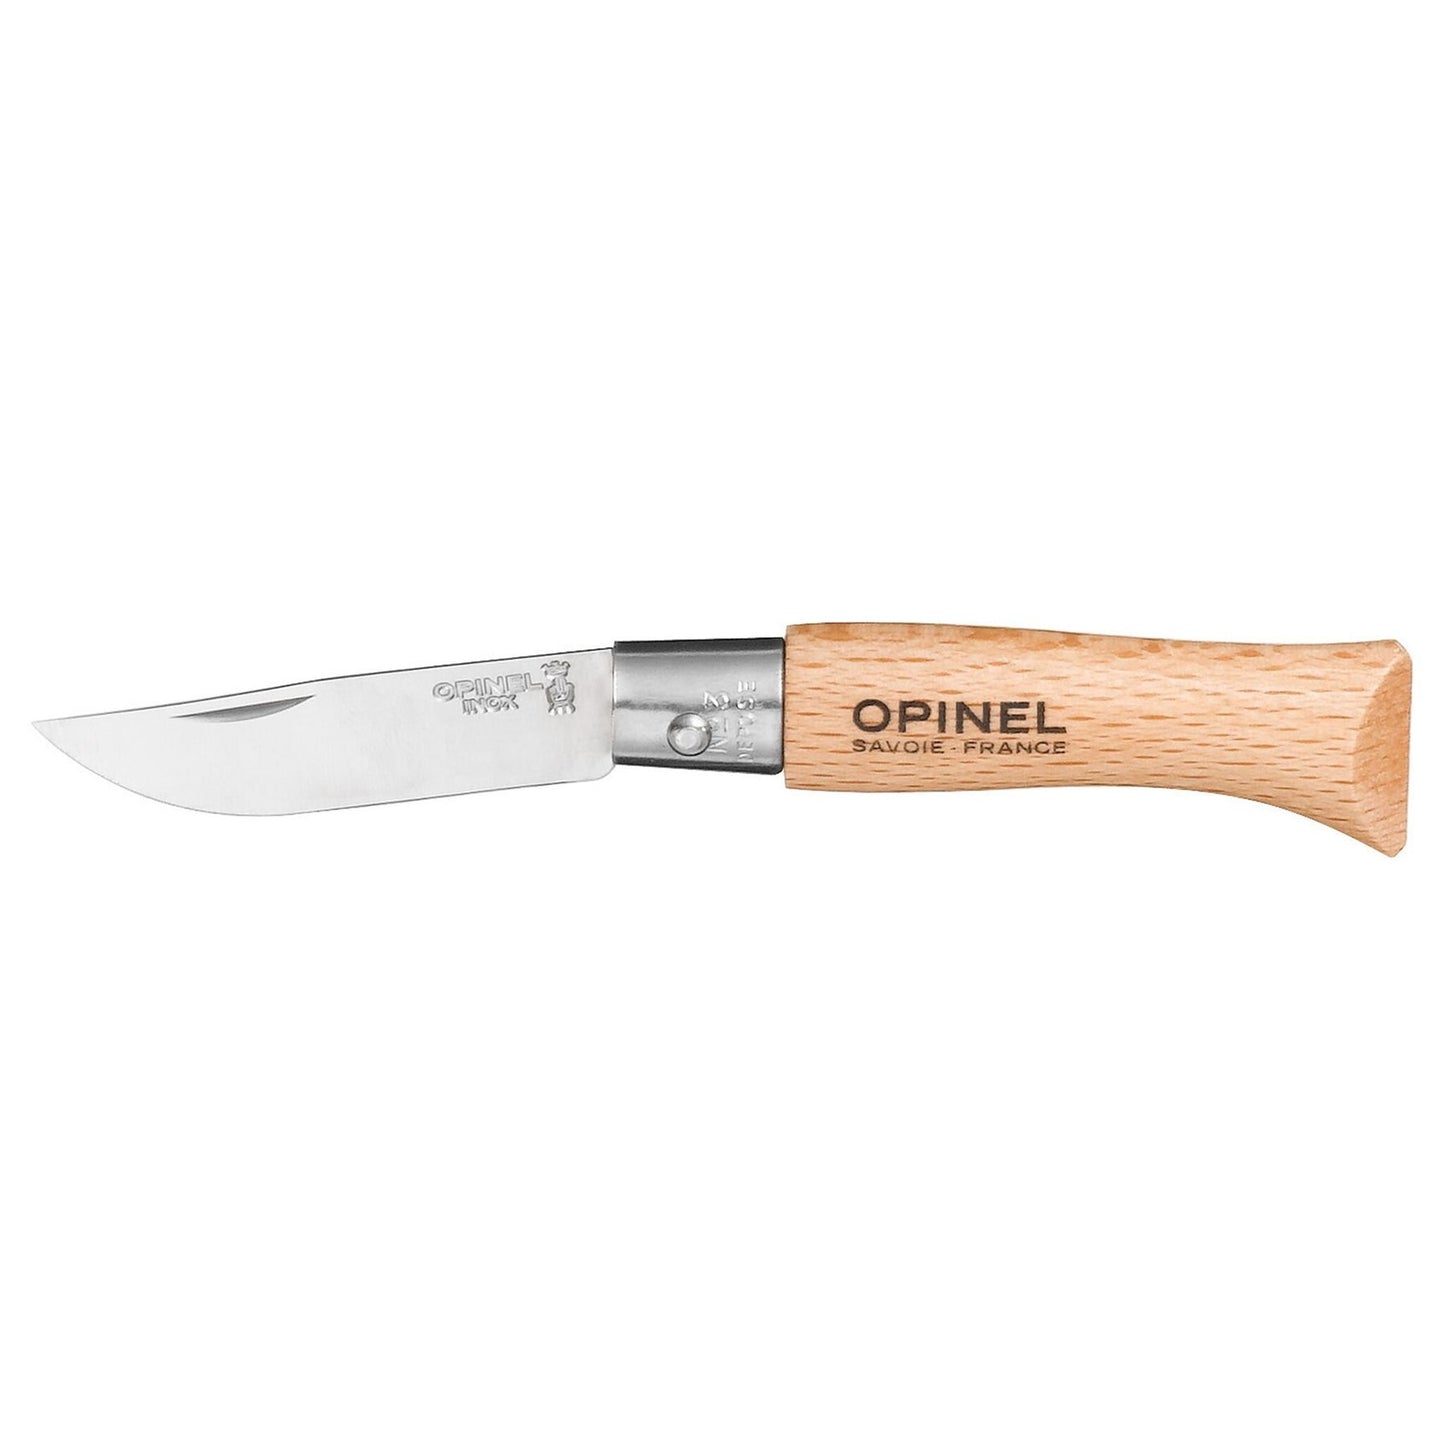 Opinel No.3 Stainless Steel Folding